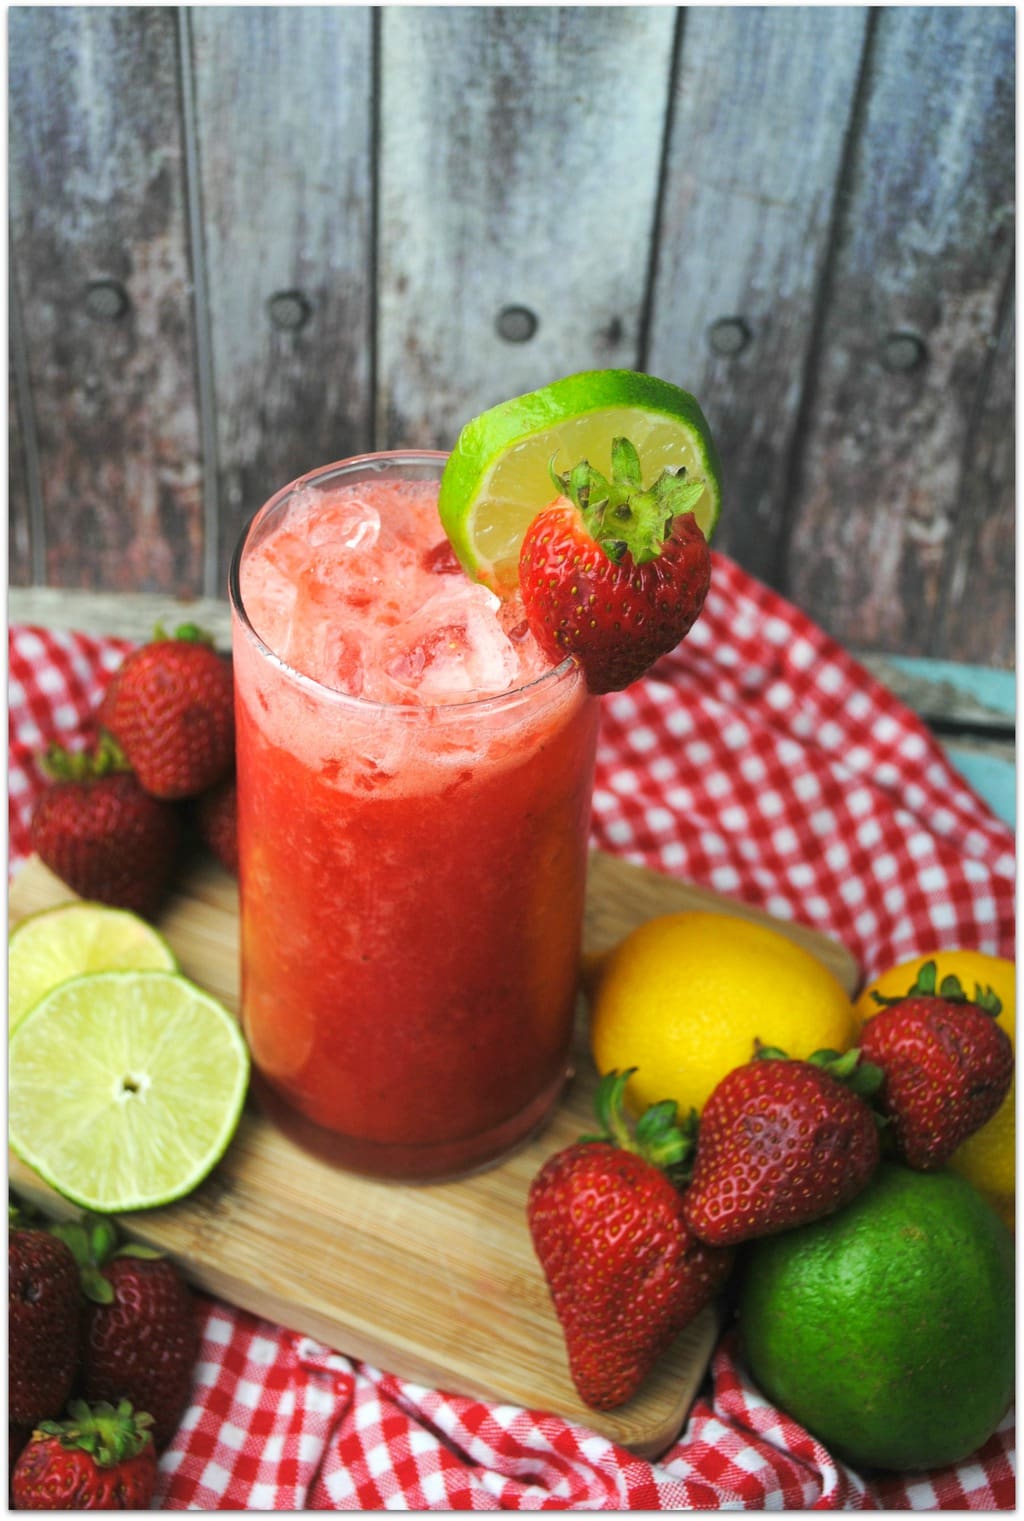 This Strawberry Aqua Fresca is the perfect drink to cool you off on a hot day. It may still be pretty cold where you are but here in Florida, it's strawberry season!